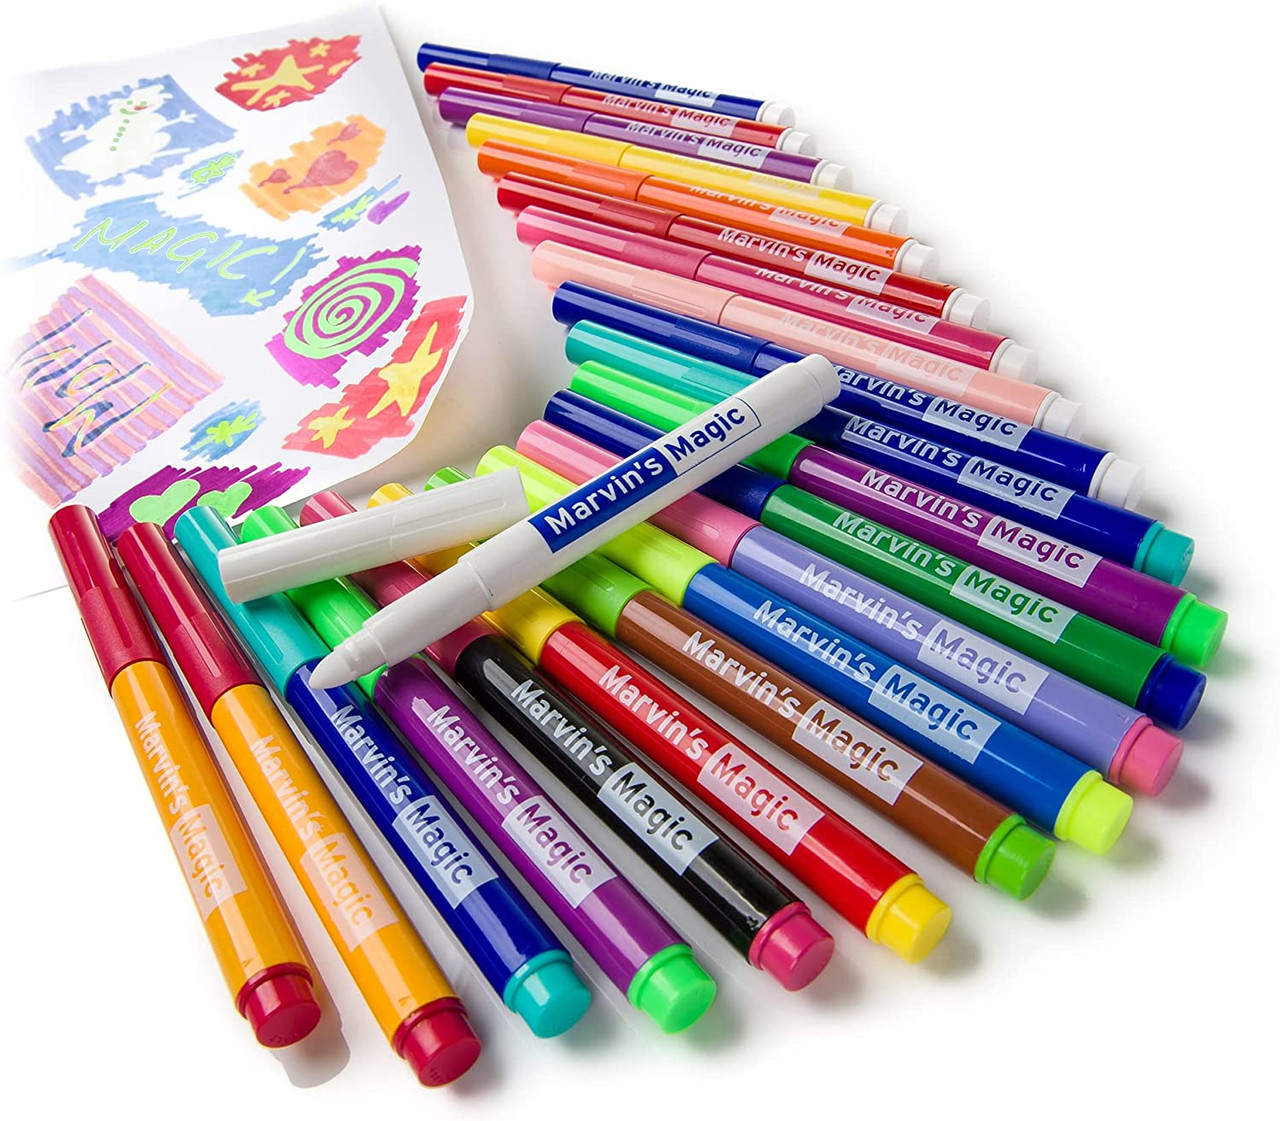 Marvin's Magic Pens Color Changing Markers - The Fun Company